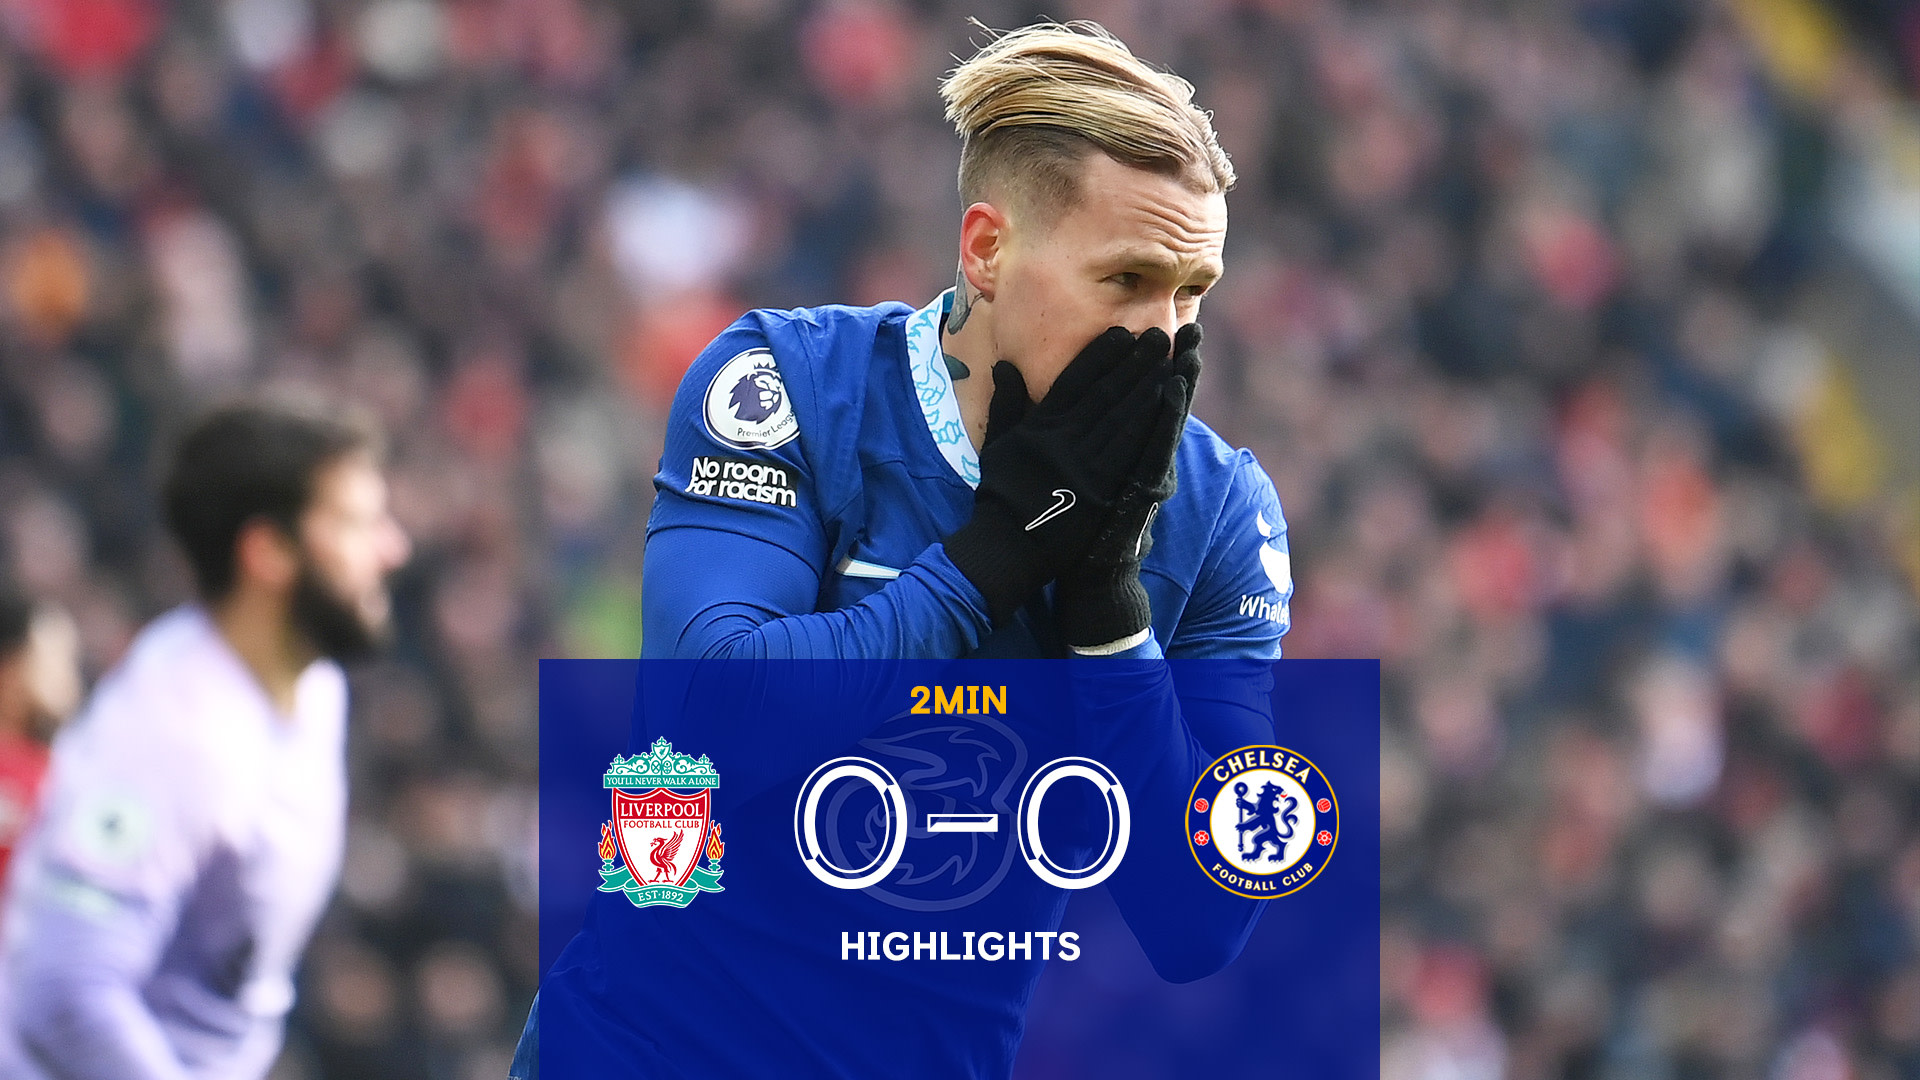 Highlights Liverpool 0-0 Chelsea Video Official Site Chelsea Football Club